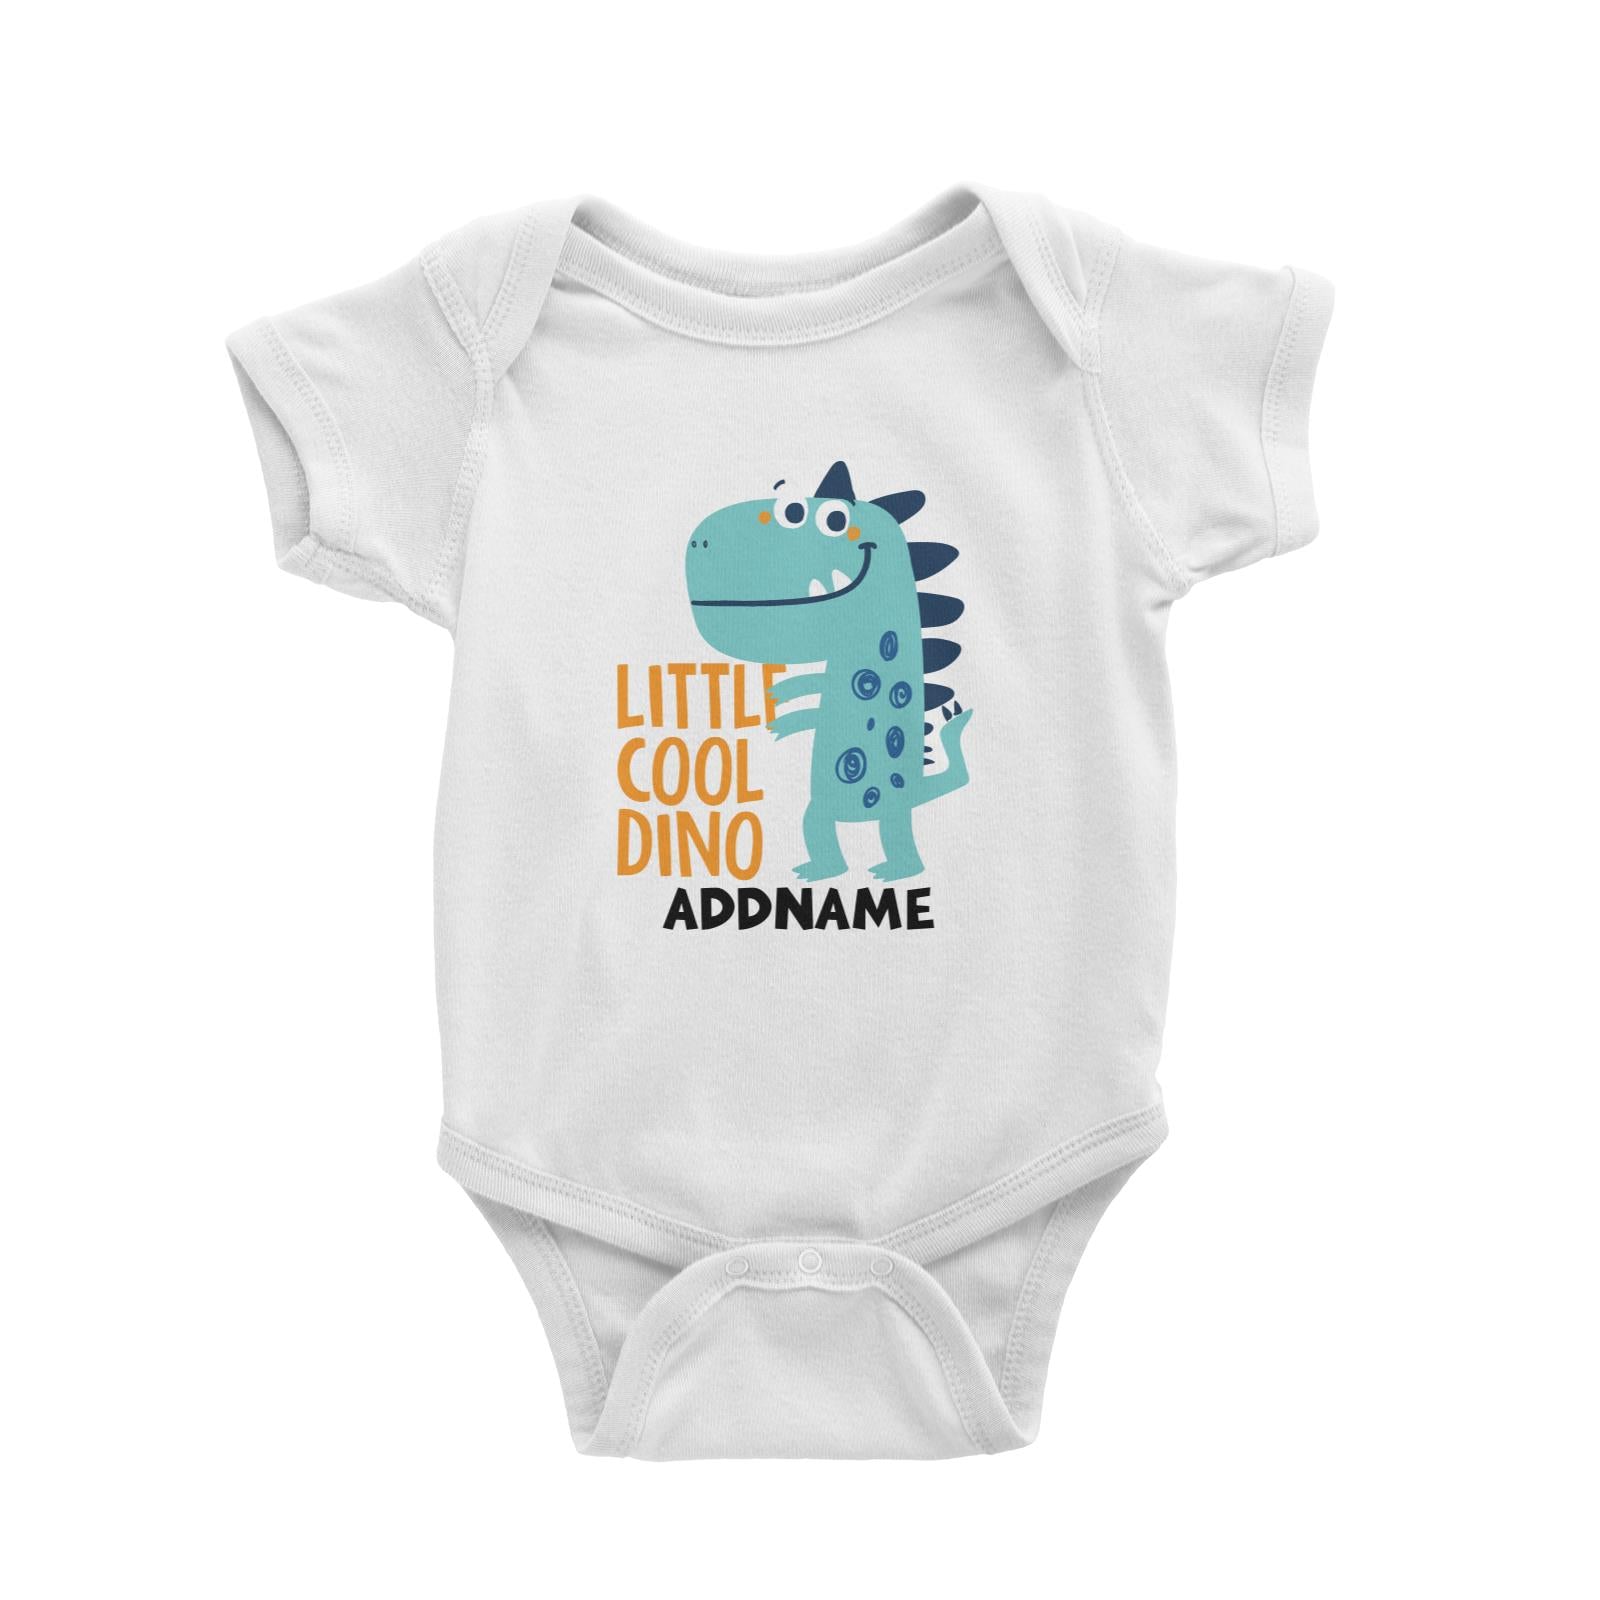 Little Cool Dino Addname Baby Romper